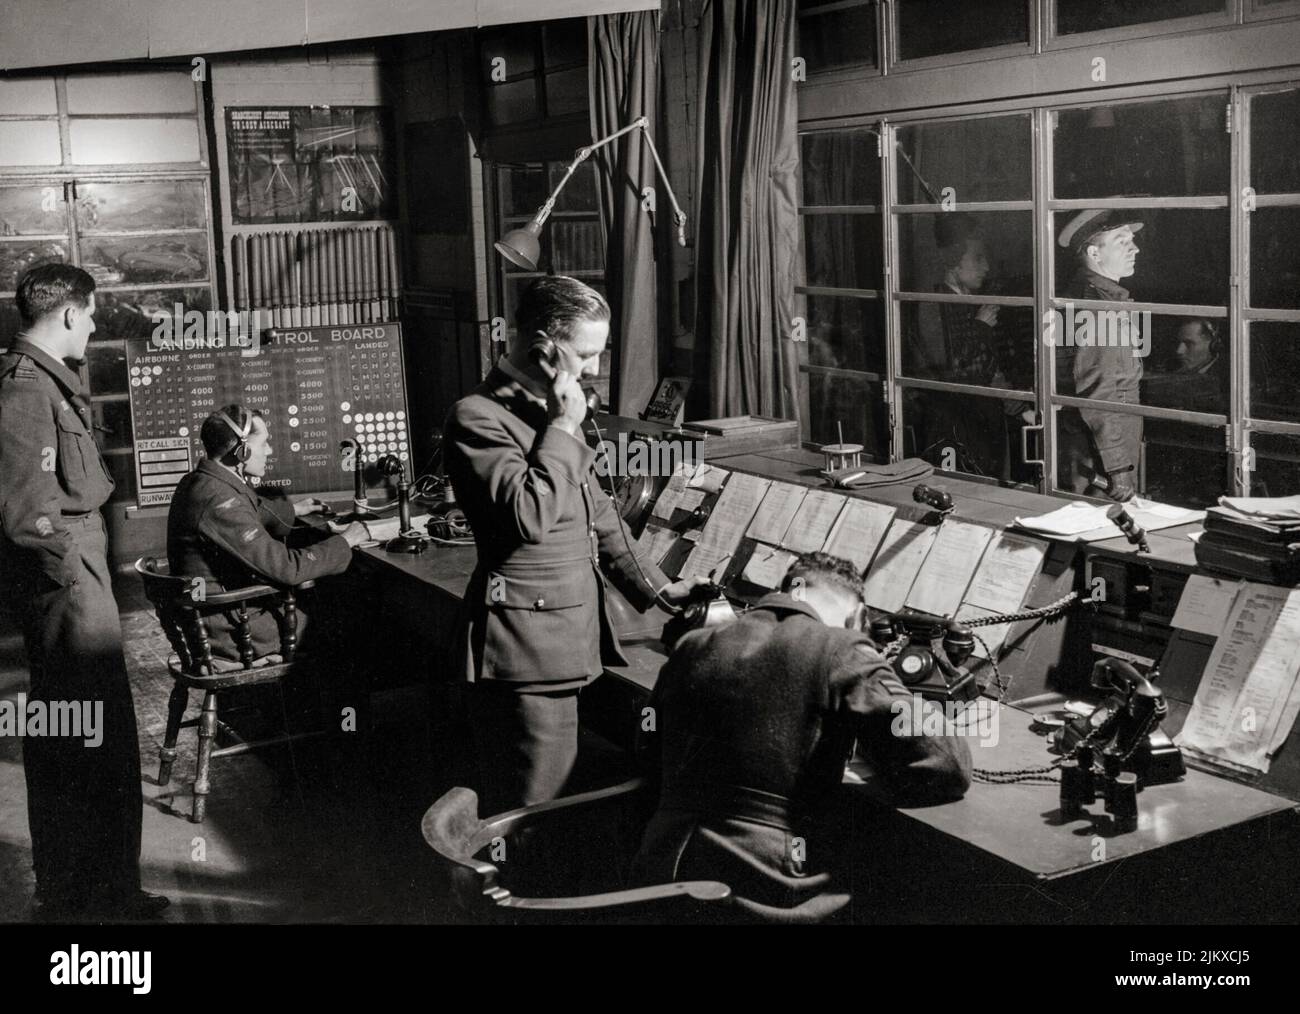 The Officer of the Watch in the Watch Office at Snaith, Yorkshire, England, guiding Handley Page Halifaxes of No. 51 Squadron RAF back to base after a night raid on Nuremberg. The Station Commander of Snaith, can be seen waiting outside on the balcony of the Control Tower. Stock Photo